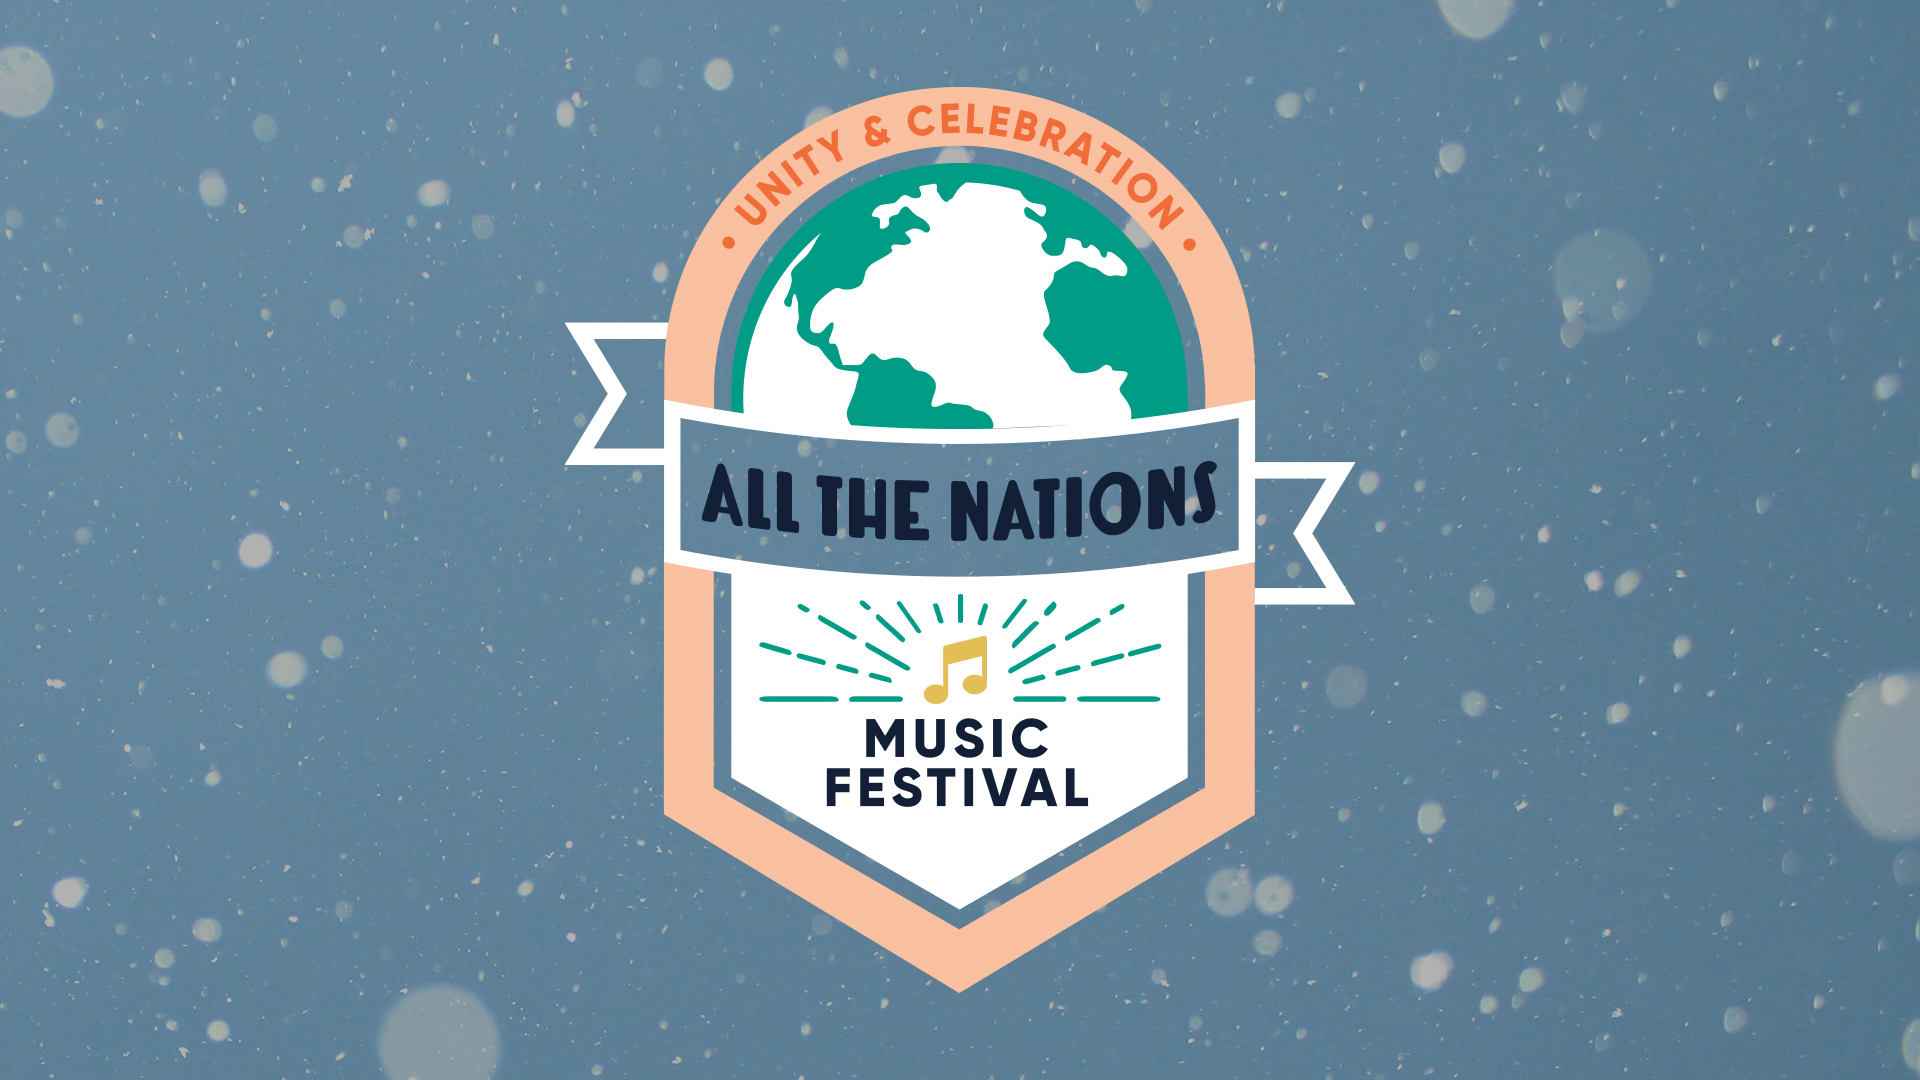 All the Nations Music Festival